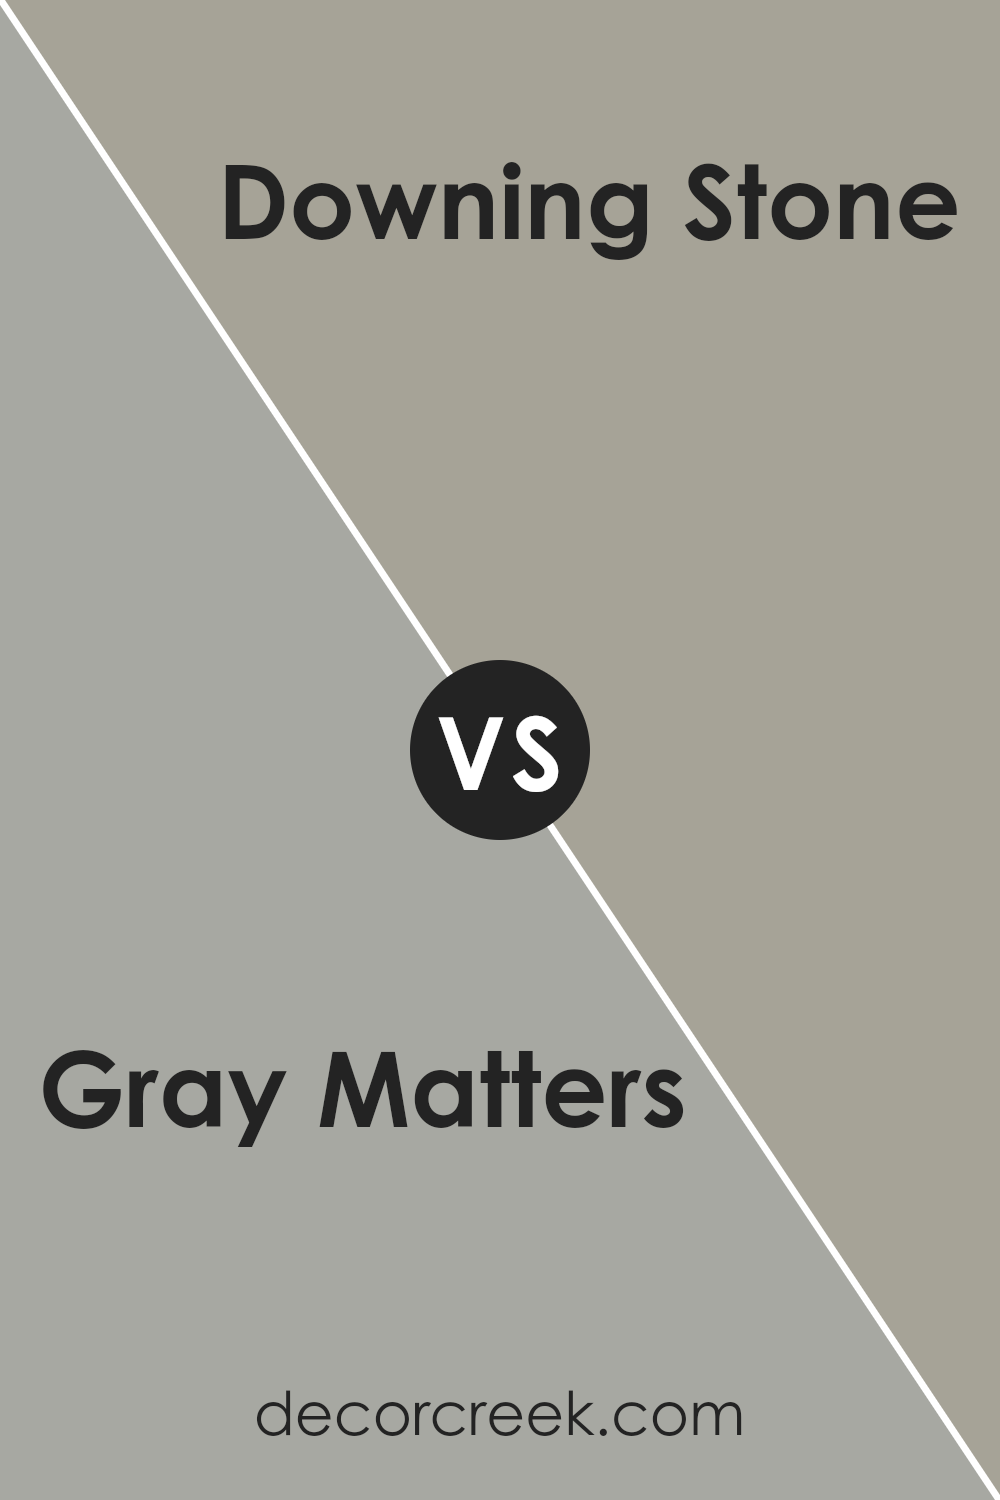 gray_matters_sw_7066_vs_downing_stone_sw_2821